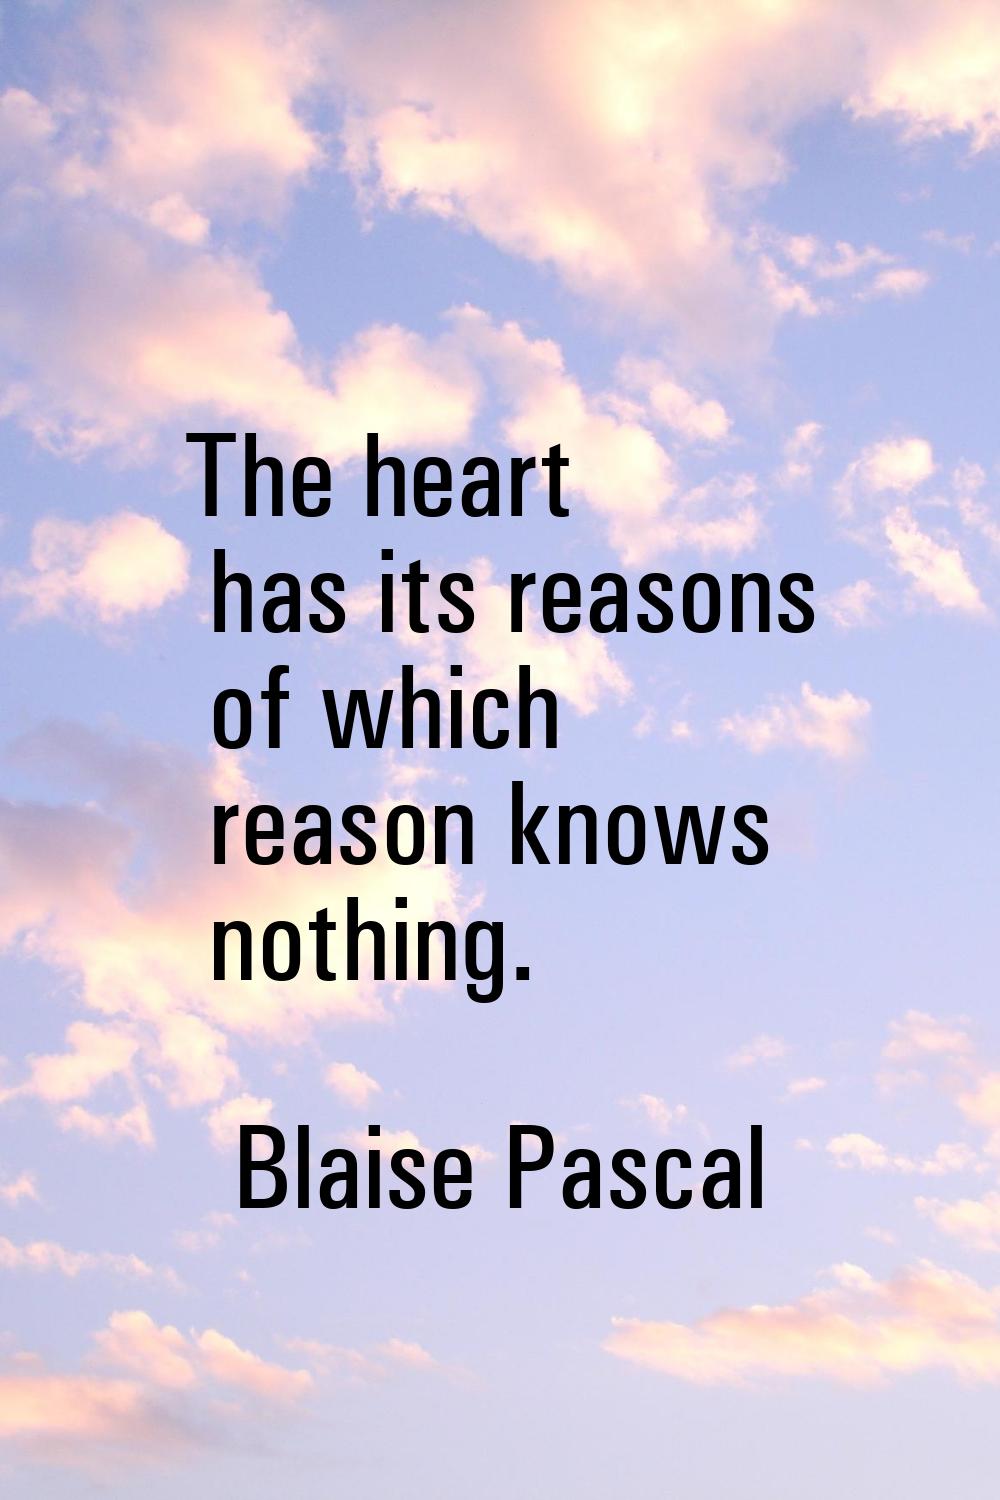 The heart has its reasons of which reason knows nothing.